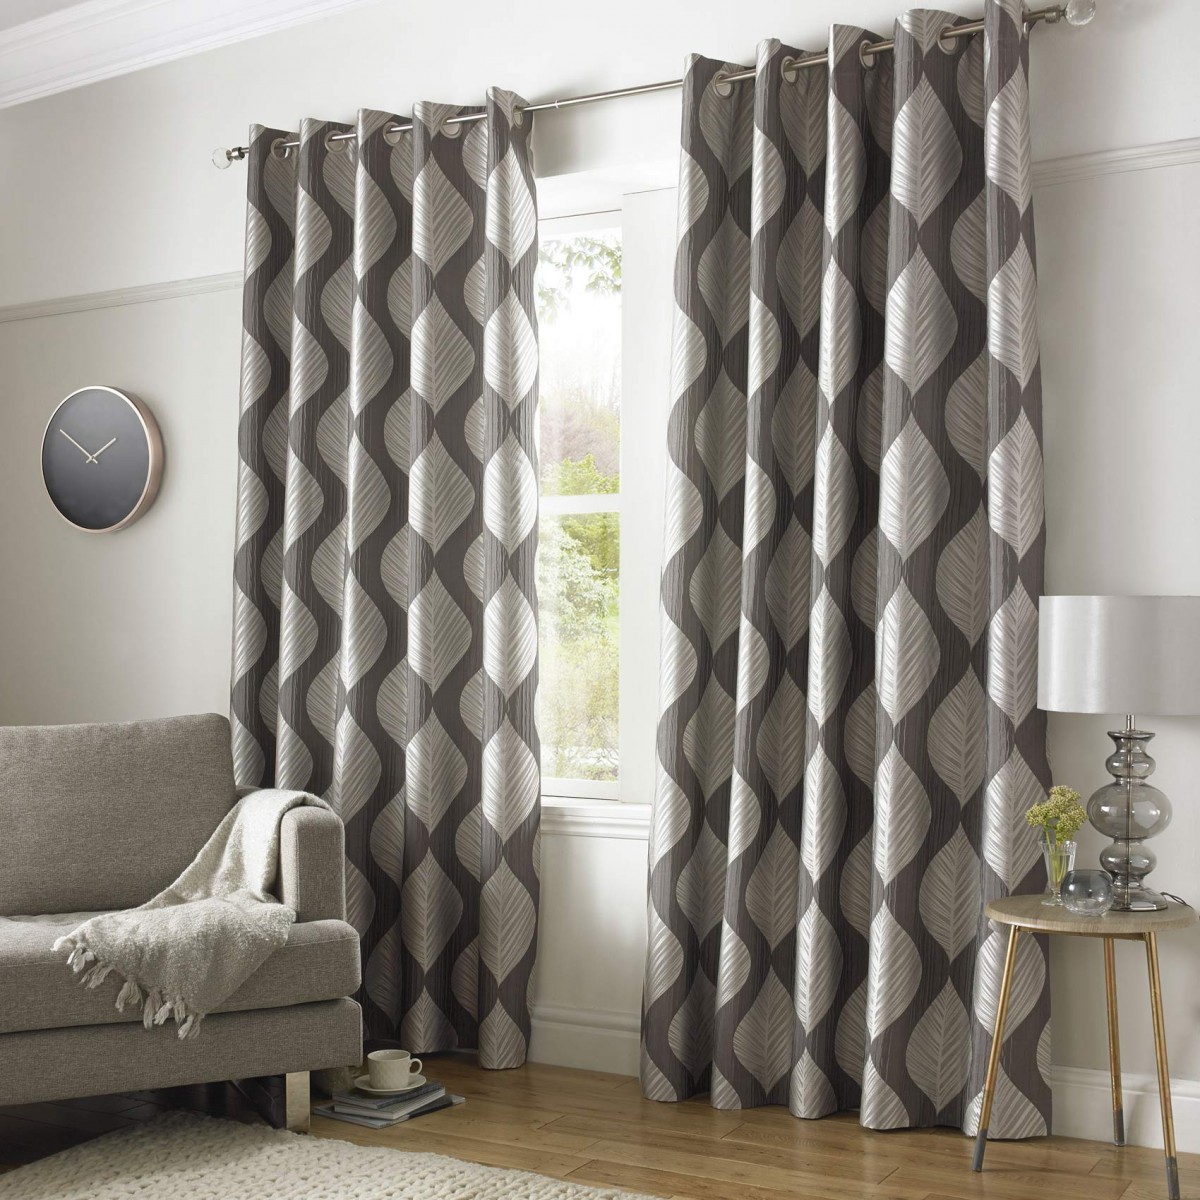 silver curtains ashley wilde simone lined eyelet curtains - silver LMCXQXV